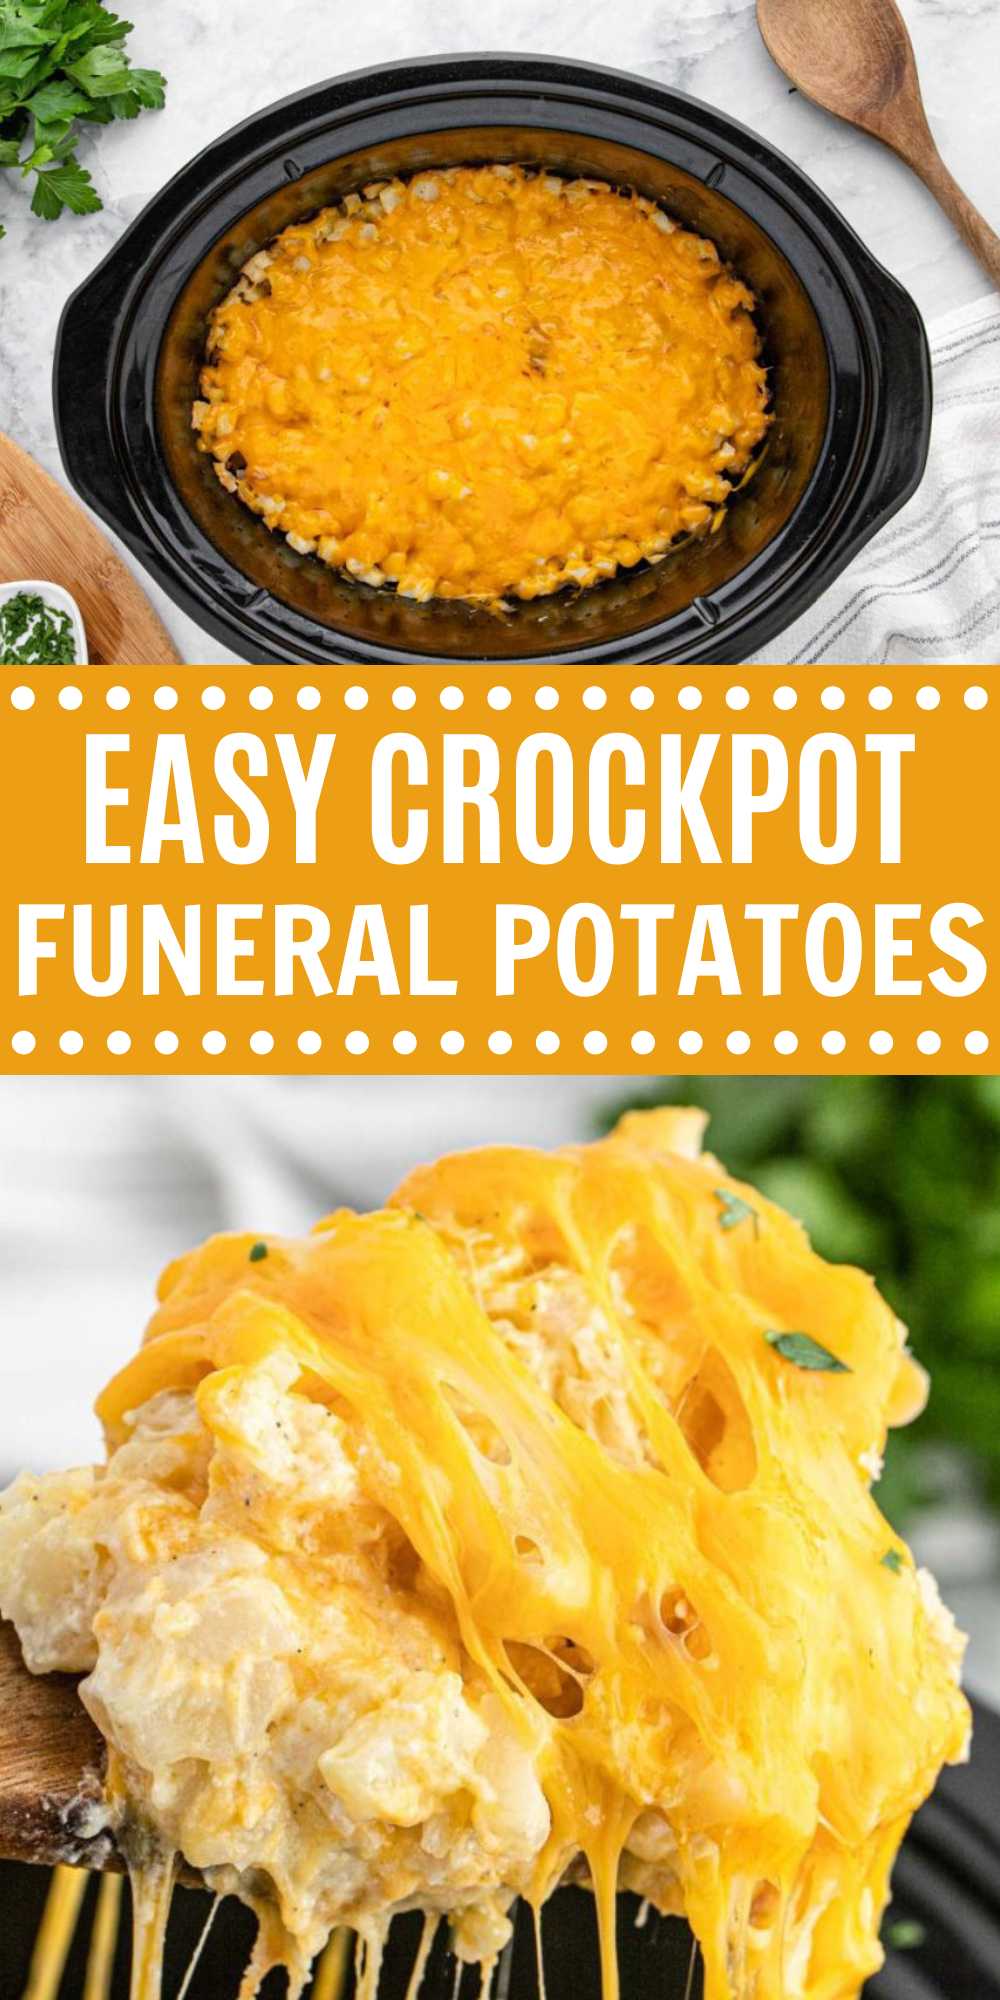 This Crockpot Funeral Potatoes Recipe is a simple side dish that is flavorful. Make this slow cooker recipe for your next potluck. This simple side dish is delicious and easy to make. Save oven space this holiday and make everyone's favorite cheesy potatoes recipe side dish in the slow cooker. #eatingonadime #crockpotfuneralpotatoes #funeralpotatoes